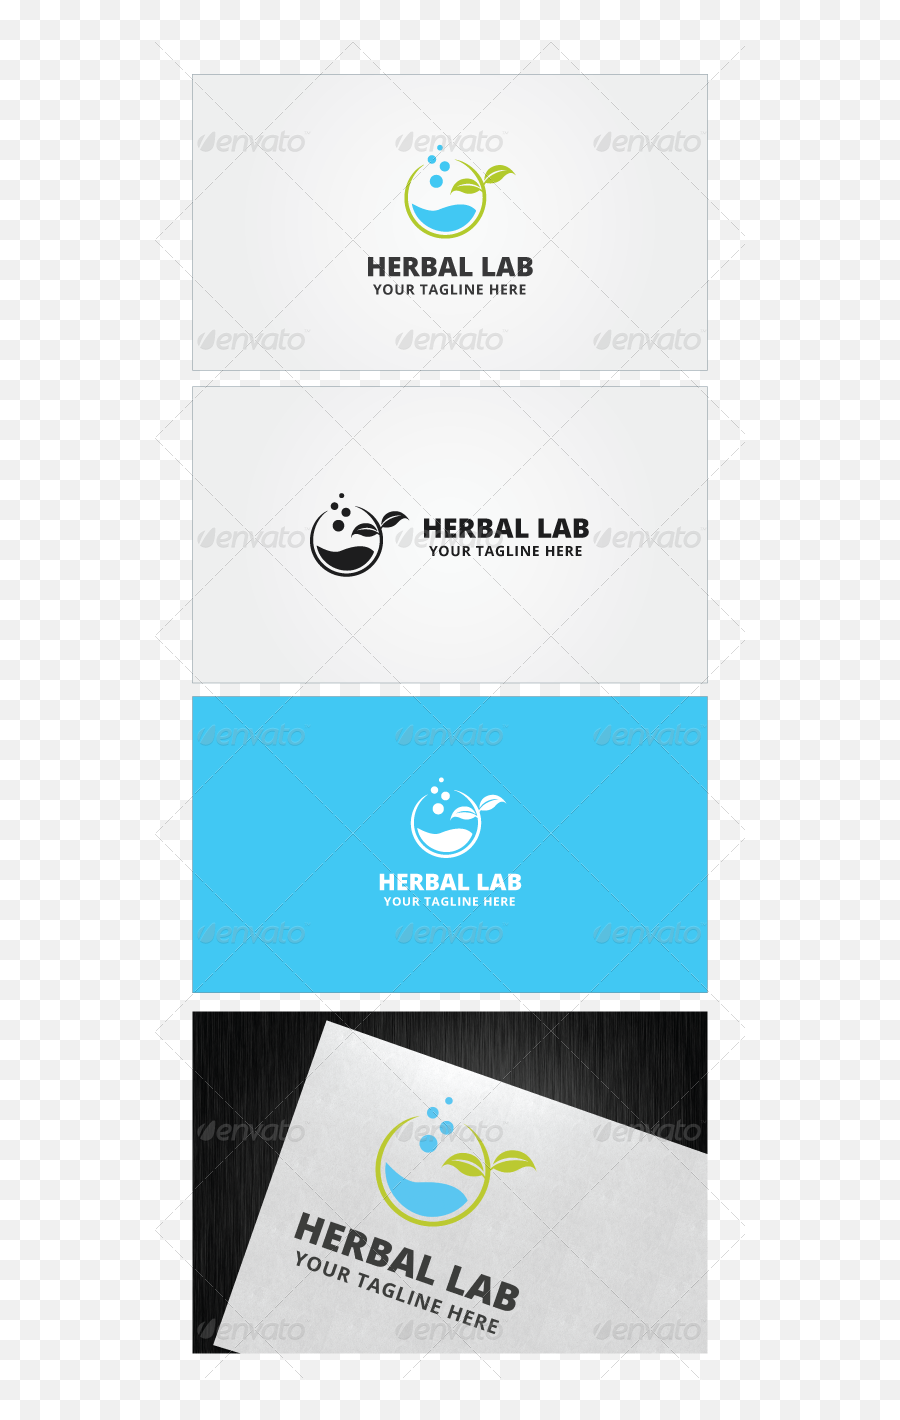 Herbal Lab Logo Templatere Sizable Vector Eps And Ai Psd Emoji,Herbal Logo